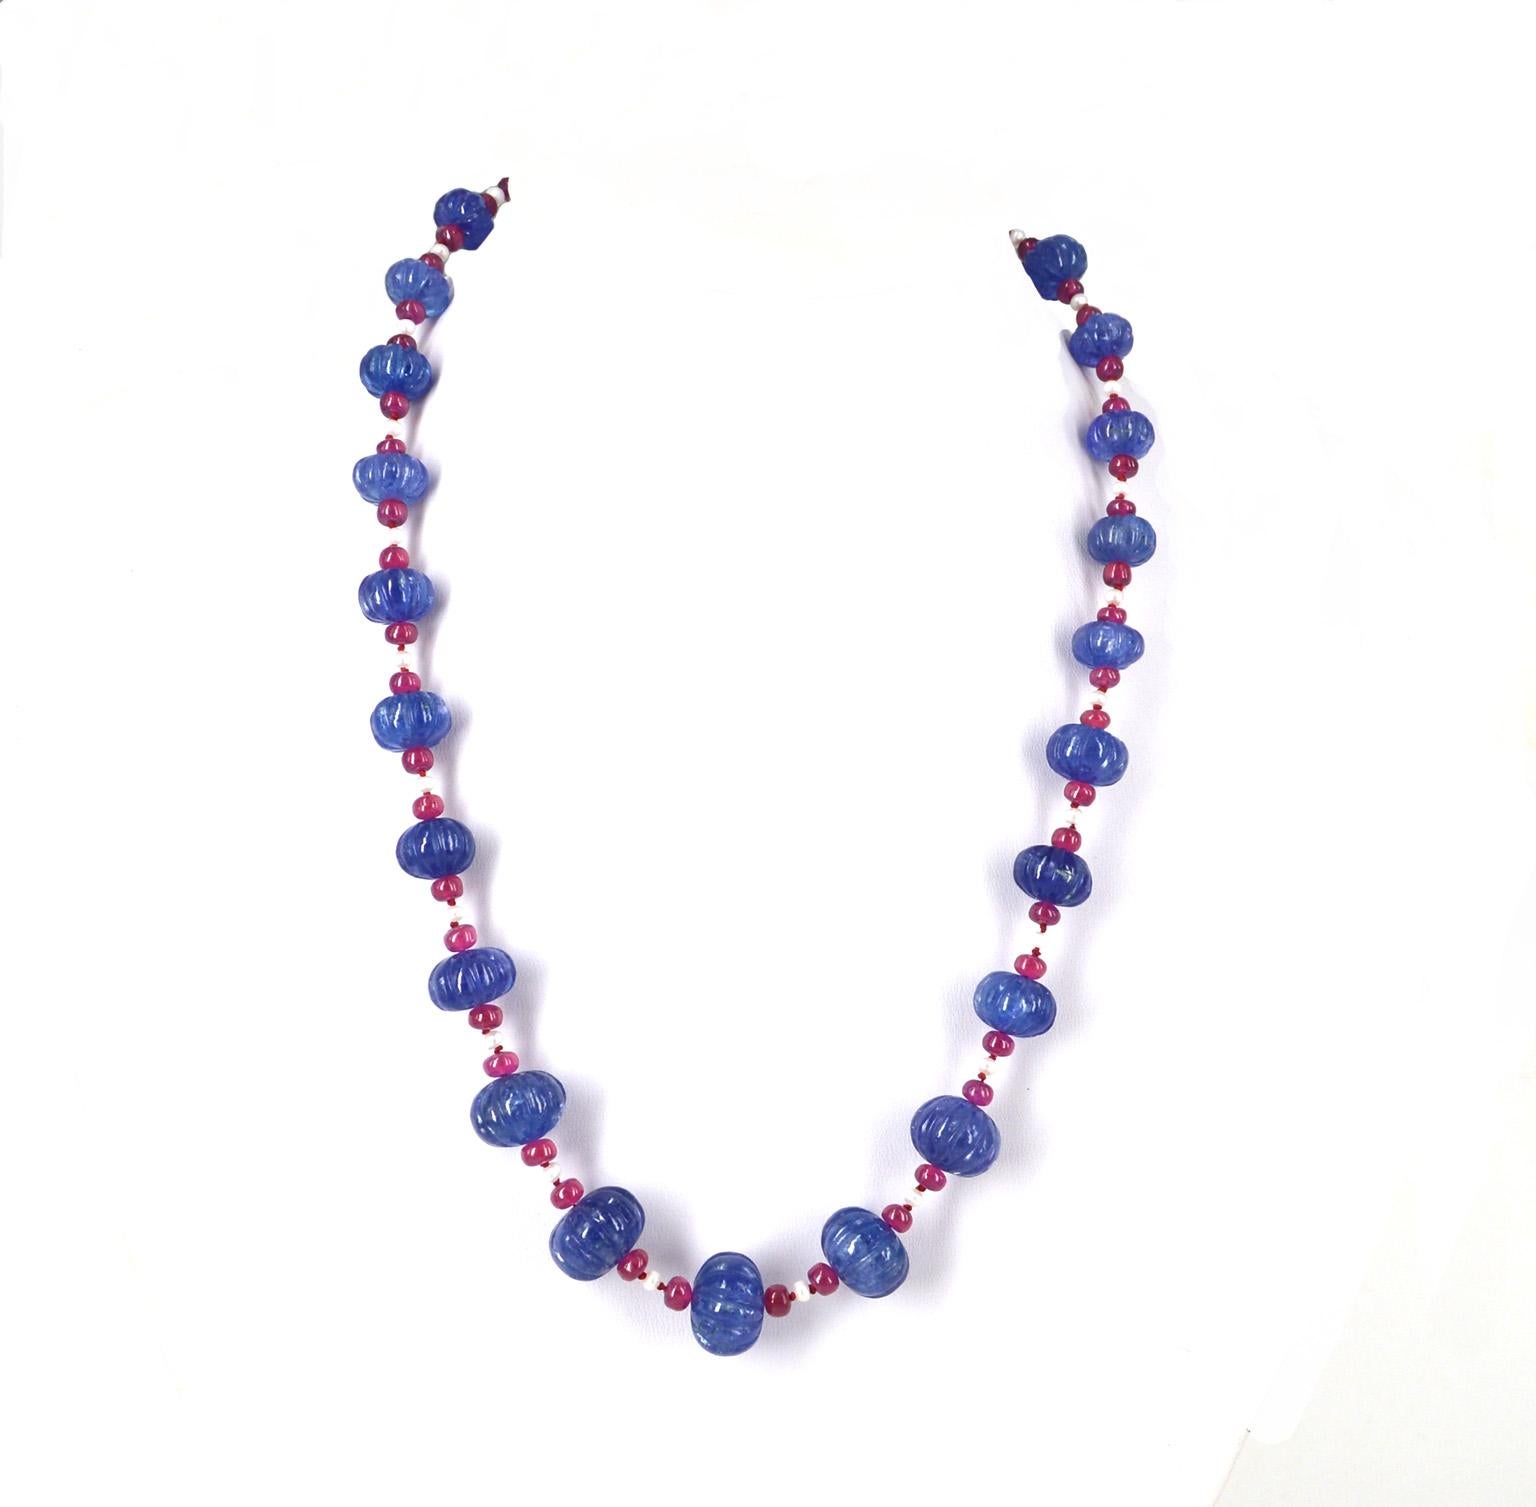 Outstanding necklace with natural graduated carved Tanzanite, natural Brazilian Rubies and Fresh Water Pearls hand knotted on Red thread with a 10mm 9ct Gold corrugated clasp.
Tanzanites size from 14.3x11mm up to 20x16mm, the stones have some